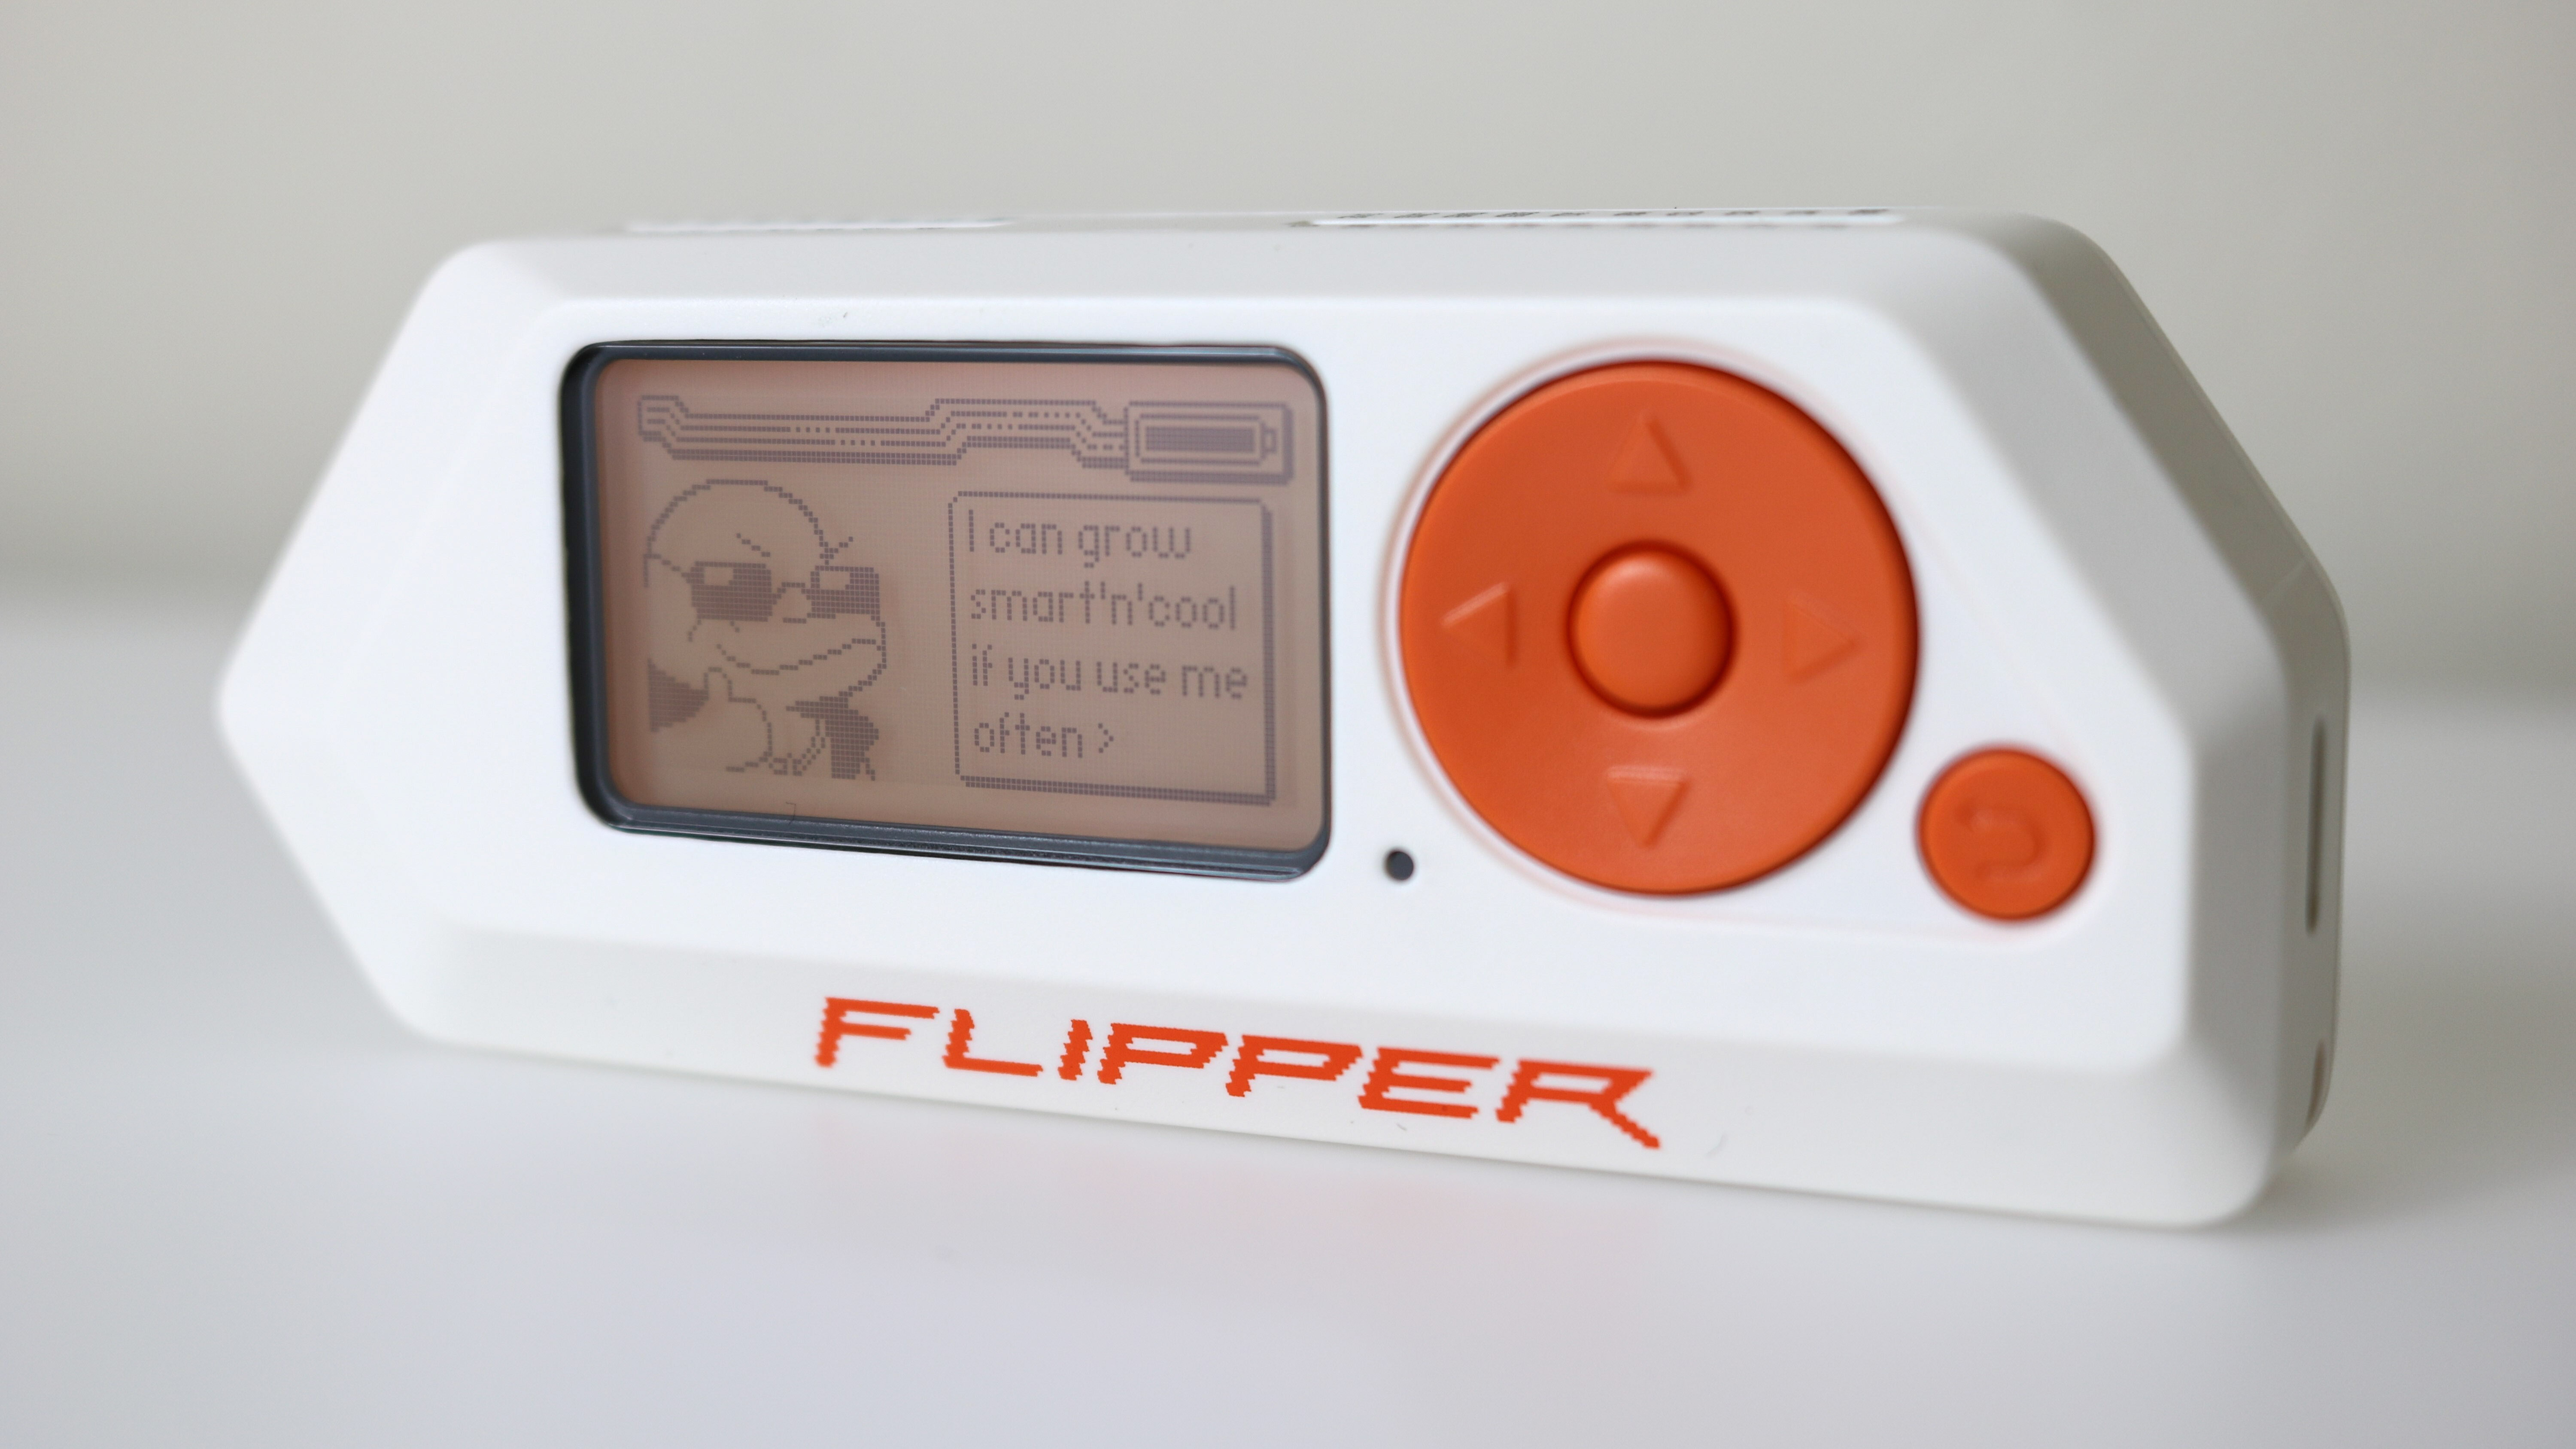 Is The Flipper Zero Useful For Anything? 